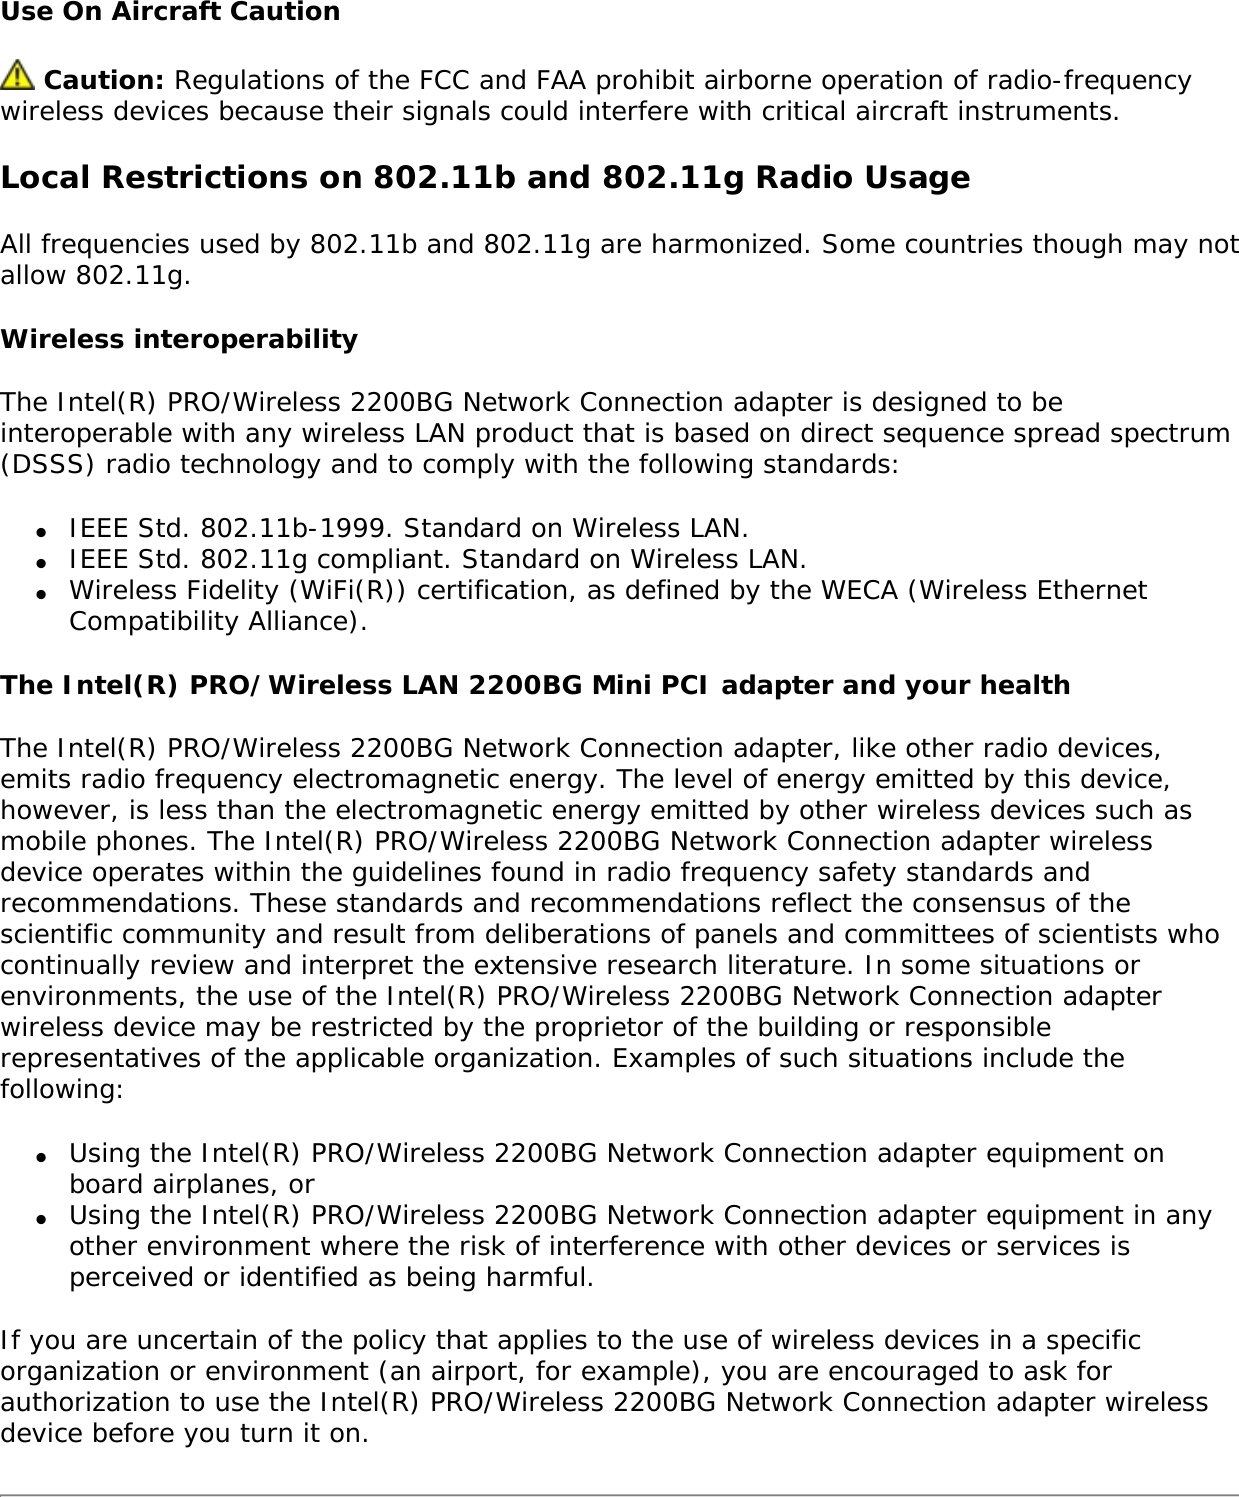 Safety NoticesThe FCC with its action in ET Docket 96-8 has adopted a safety standard for human exposure to radio frequency (RF) electromagnetic energy emitted by FCC certified equipment. The Intel(R) PRO/Wireless 2200BG Network Connection meets the Human Exposure limits found in OET Bulletin 65, 2001, and ANSI/IEEE C95.1, 1992. Proper operation of this radio according to the instructions found in this manual will result in exposure substantially below the FCC’s recommended limits. The following safety precautions should be observed: ●     Do not touch or move antenna while the unit is transmitting or receiving. ●     Do not hold any component containing the radio such that the antenna is very close or touching any exposed parts of the body, especially the face or eyes, while transmitting. ●     Do not operate the radio or attempt to transmit data unless the antenna is connected; if not, the radio may be damaged. ●     Use in specific environments: ❍     The use of wireless devices in hazardous locations is limited by the constraints posed by the safety directors of such environments. ❍     The use of wireless devices on airplanes is governed by the Federal Aviation Administration (FAA). ❍     The use of wireless devices in hospitals is restricted to the limits set forth by each hospital.●     Explosive Device Proximity Warning (see below) ●     Antenna Warning (see below) ●     Use on Aircraft Caution (see below) ●     Other Wireless Devices (see below) ●     Power Supply (Access Point) (see below)Explosive Device Proximity Warning Warning: Do not operate a portable transmitter (such as a wireless network device) near unshielded blasting caps or in an explosive environment unless the device has been modified to be qualified for such use. Antenna Warnings Warning: To comply with the FCC and ANSI C95.1 RF exposure limits, it is recommended for the Intel(R) PRO/Wireless 2200BG Network Connection installed in a desktop or portable computer, that the antenna for this device be installed so as to provide a separation distance of al least 20 cm (8 inches) from all persons and that the antenna must not be co-located or operating in conjunction with any other antenna or radio transmitter. It is recommended that the user limit exposure time if the antenna is positioned closer than 20 cm (8 inches).  Warning: The Intel(R) PRO/Wireless 2200BG Network Connection product is not designed for use with high-gain directional antennas. Use of such antennas with these products is illegal. 